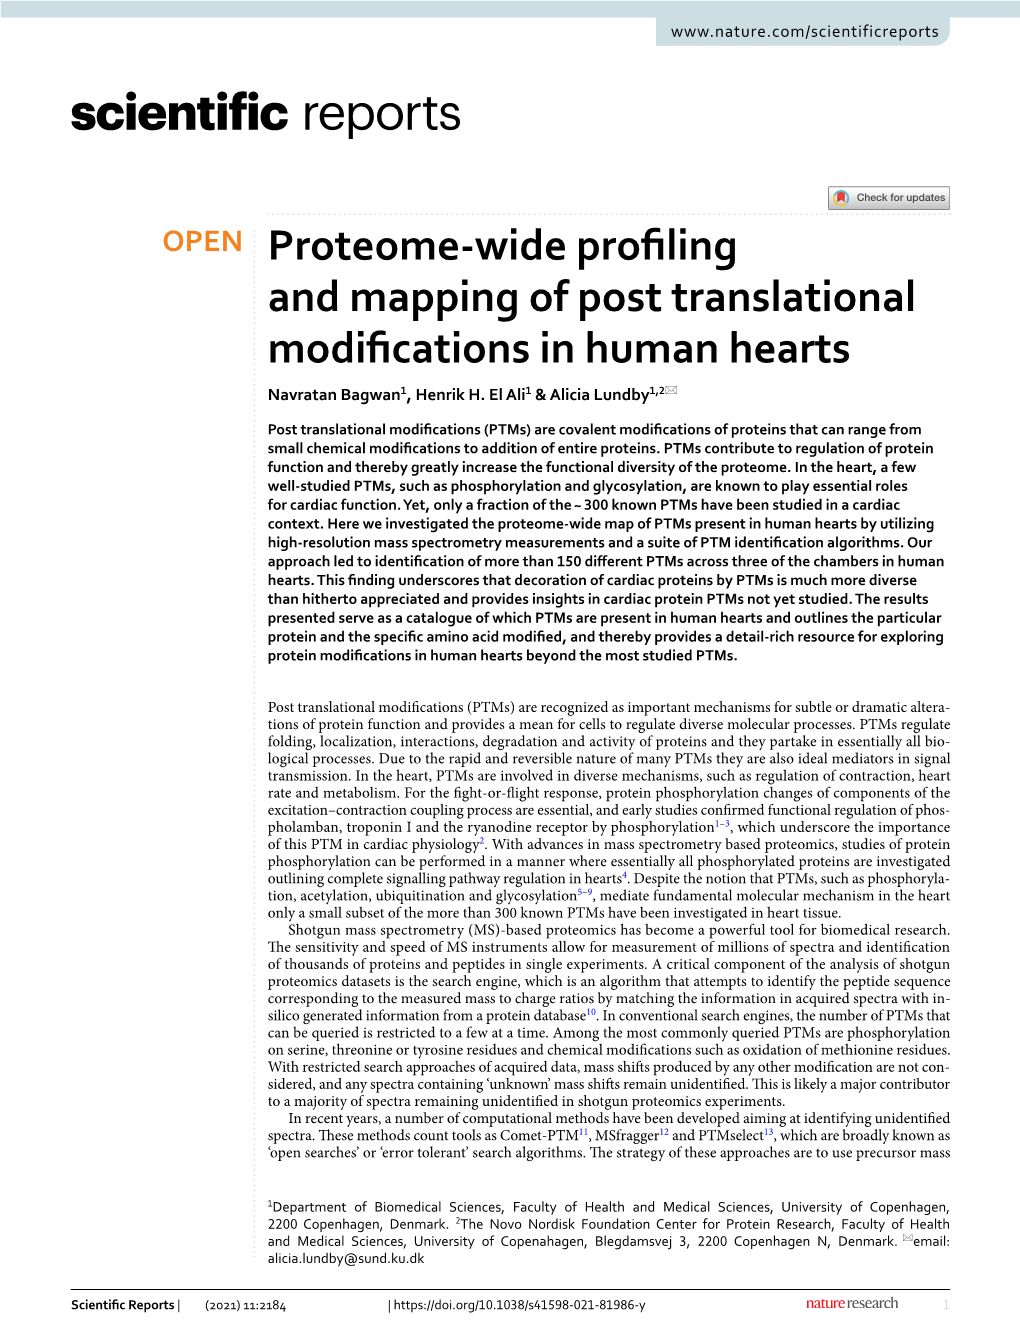 Proteome-Wide Profiling and Mapping of Post Translational Modifications In